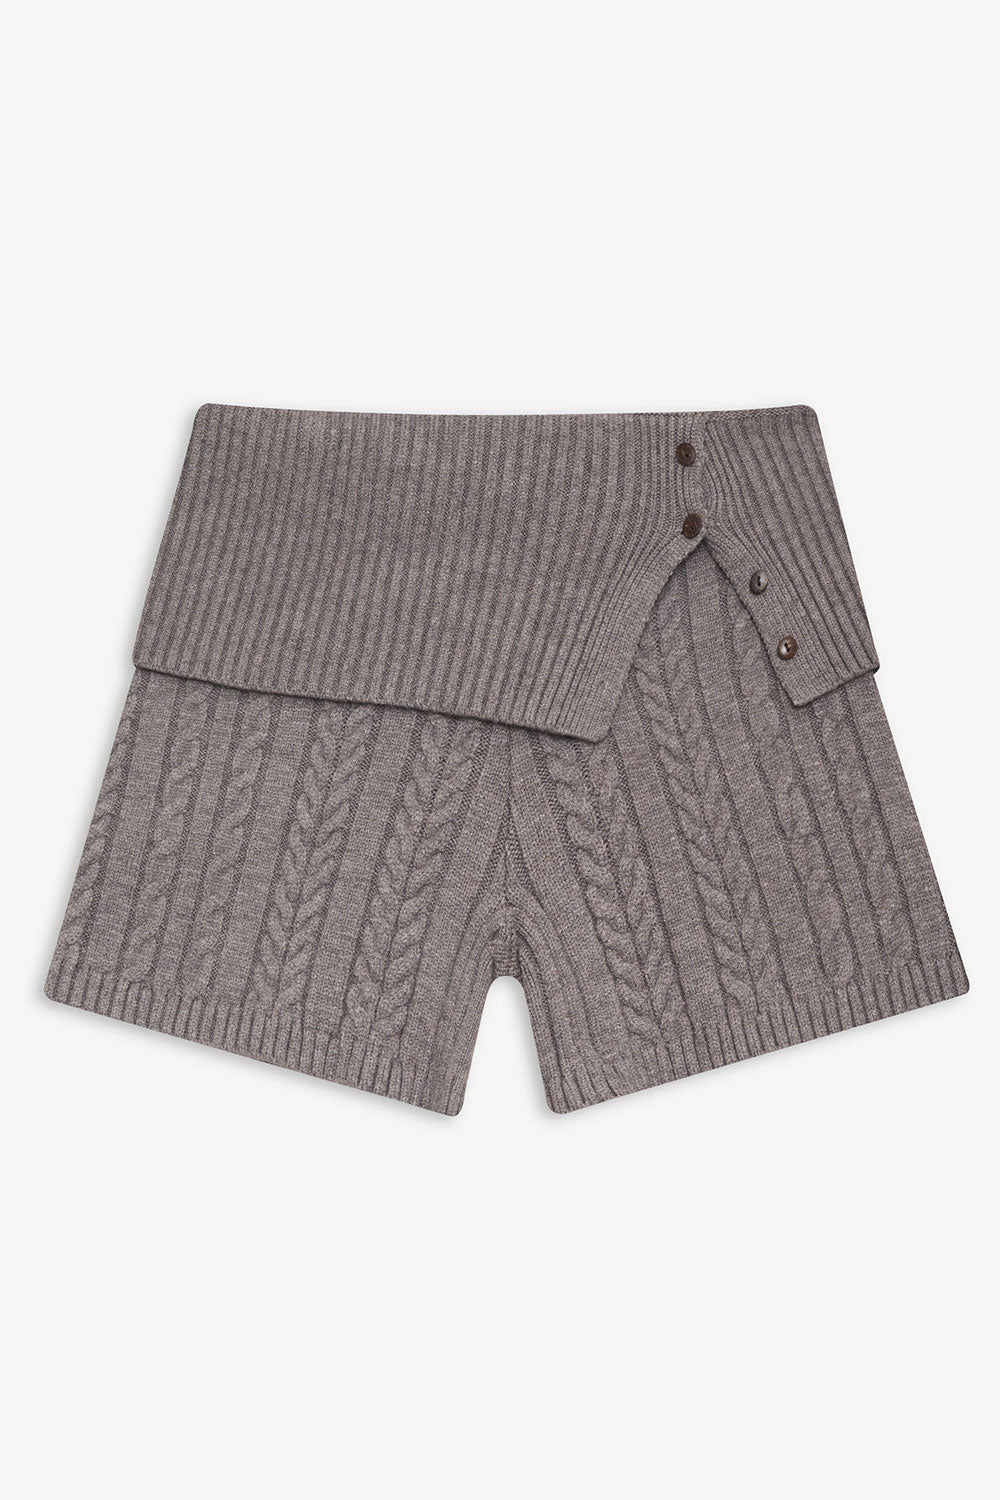 Frankies Bikinis Evermore Cable Knit Shorts